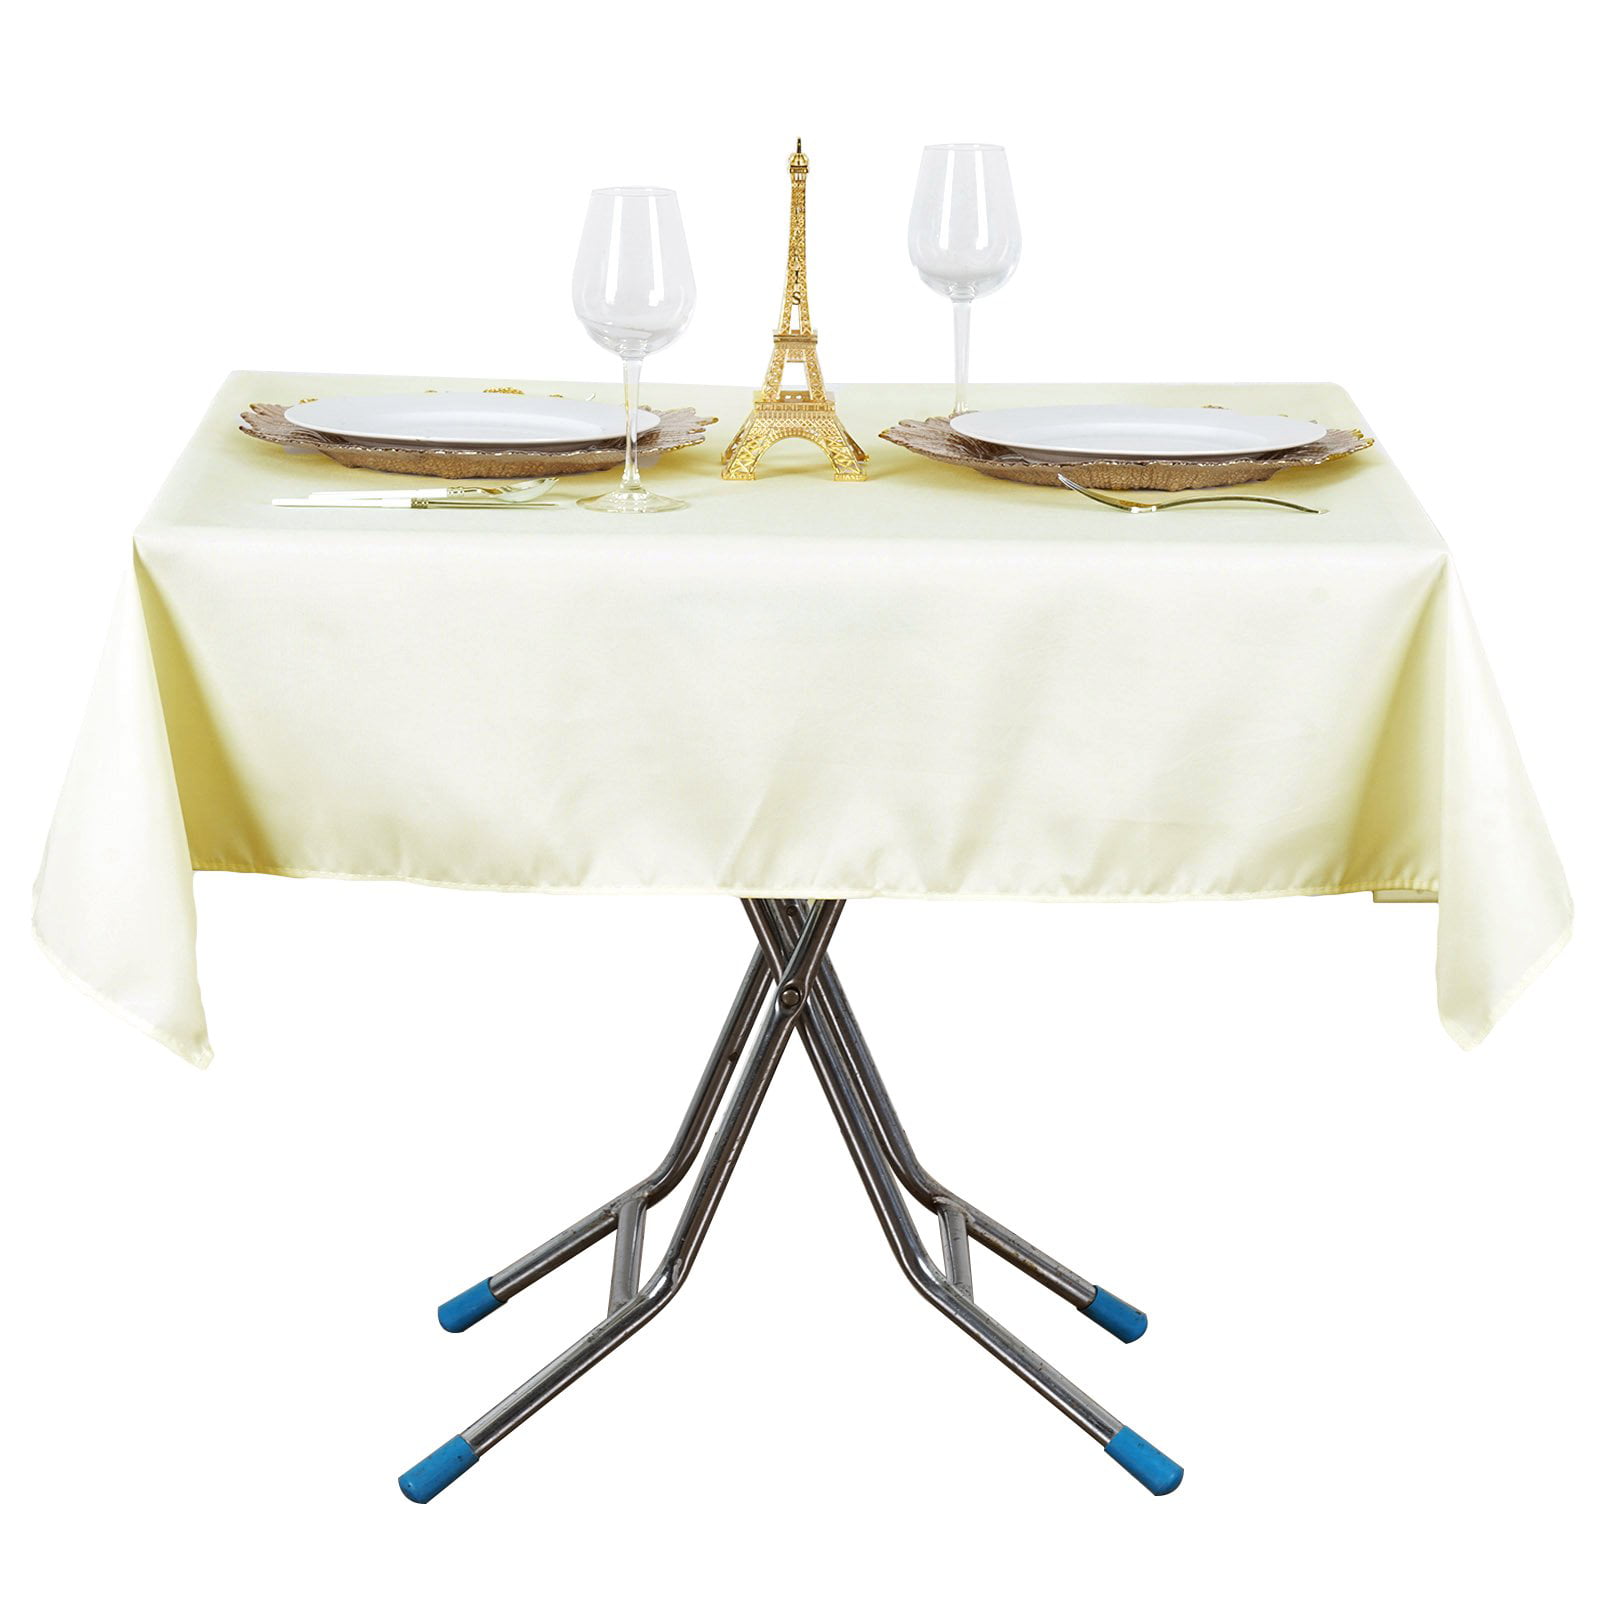 54" Inch White Round Tablecloth For Polyester Fabric For Catering Party 